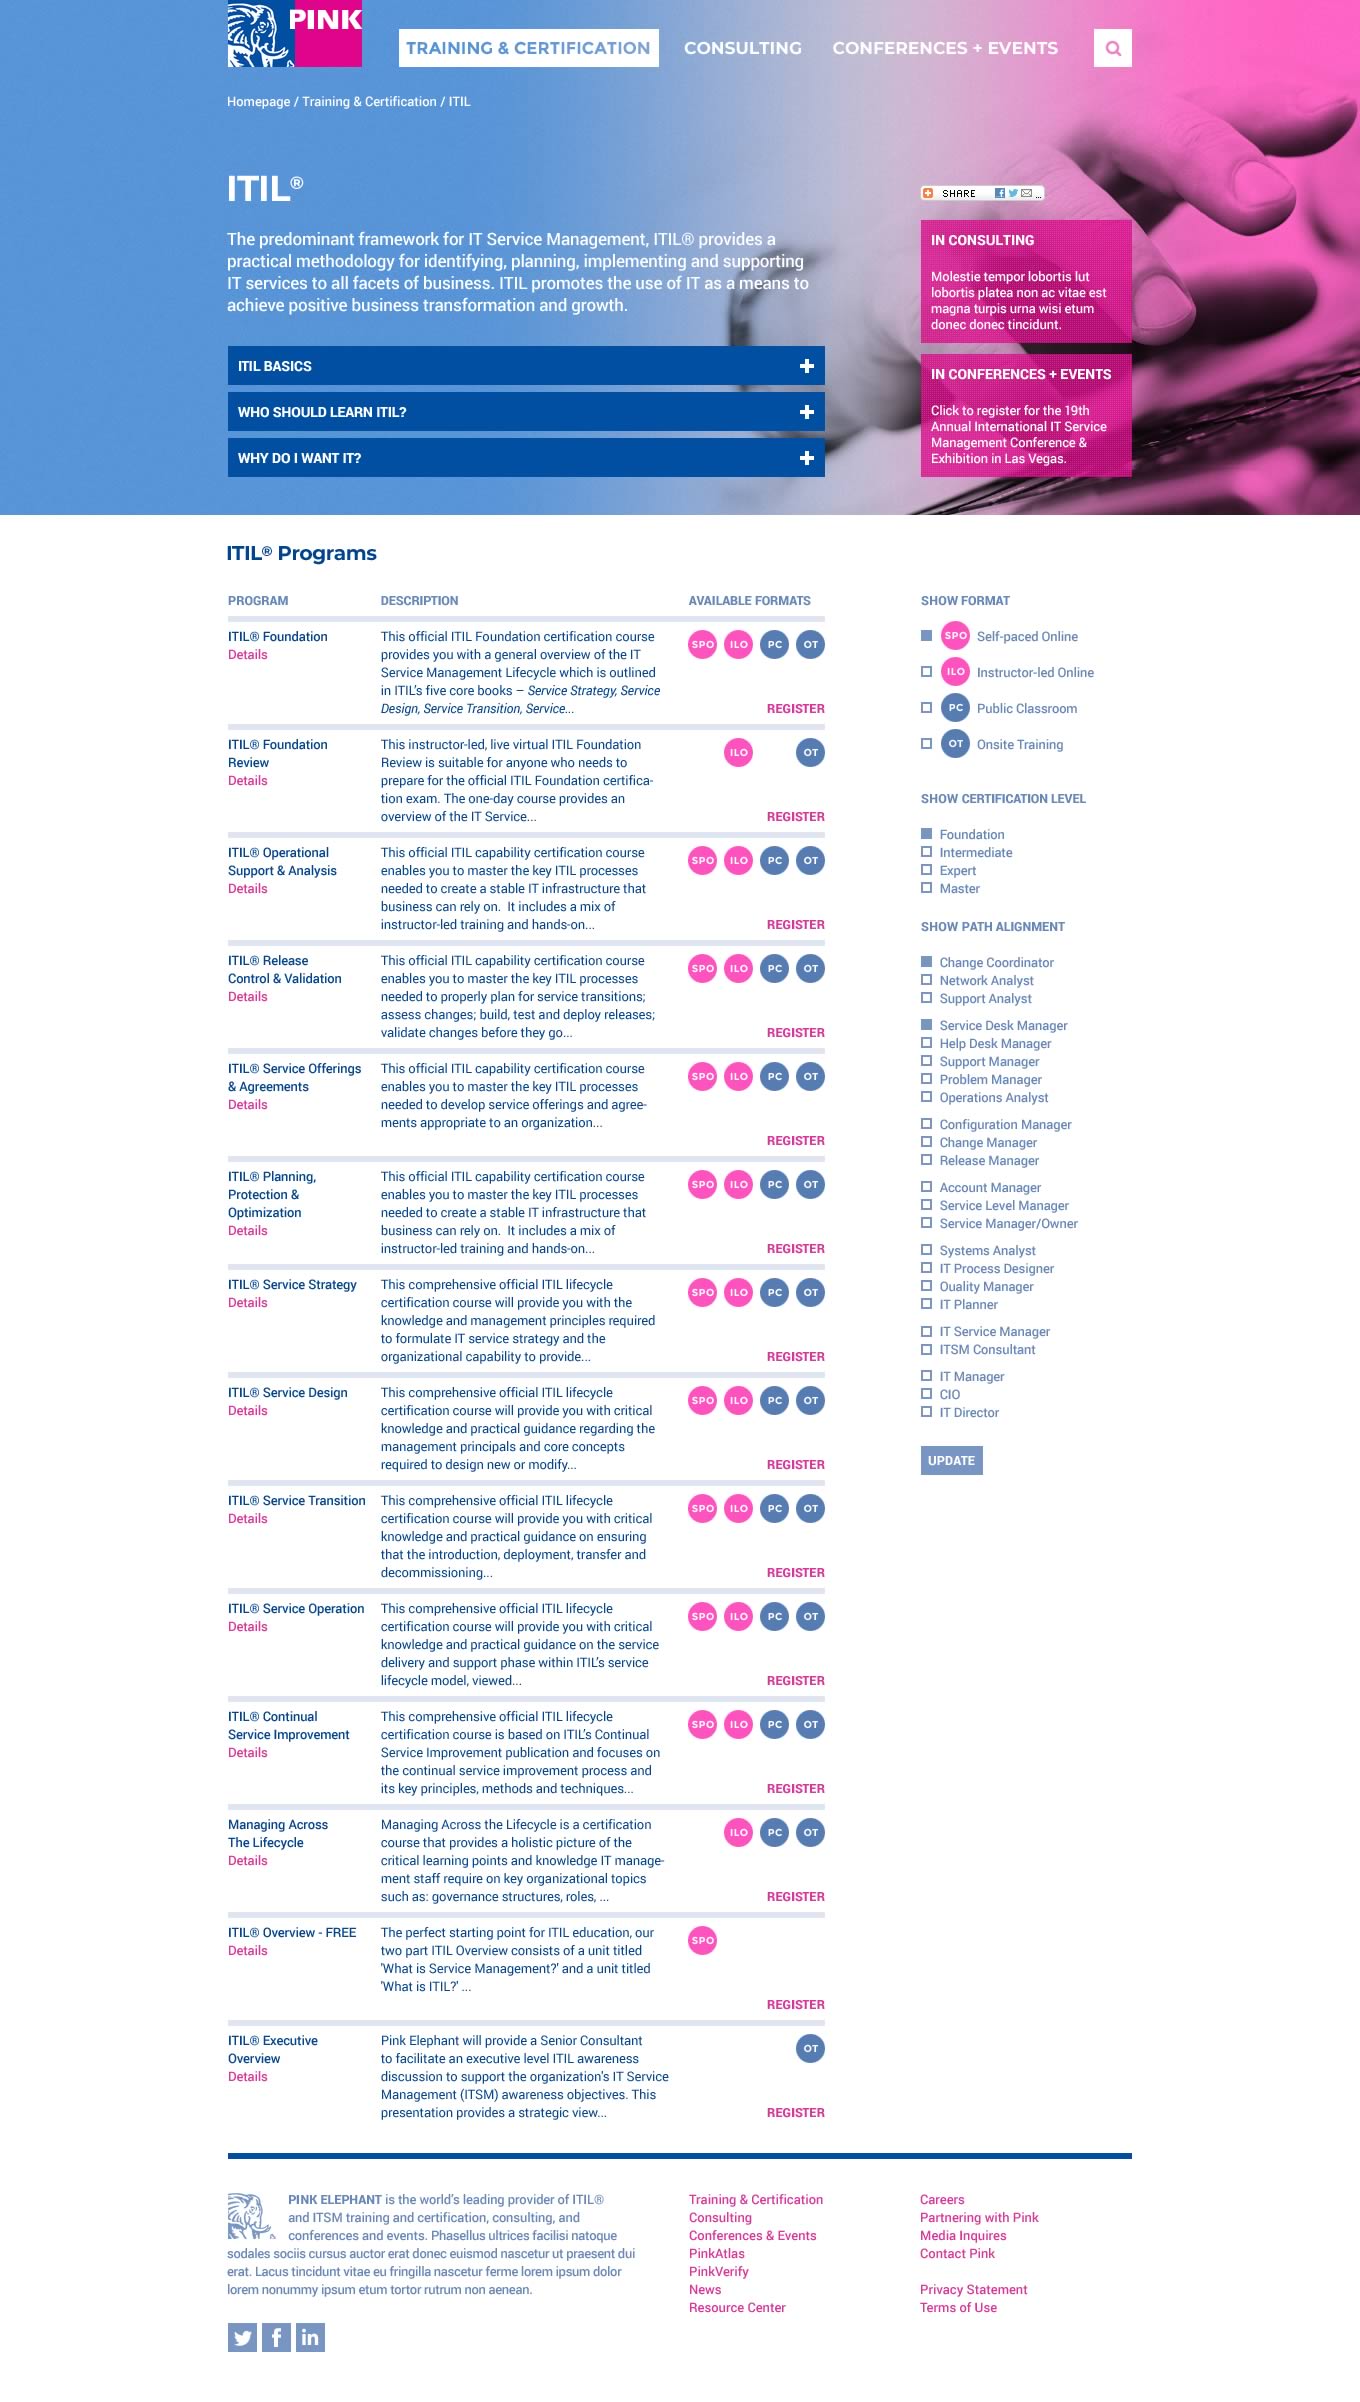 Capture of the full 'ITIL' page from the Pink Elephant website